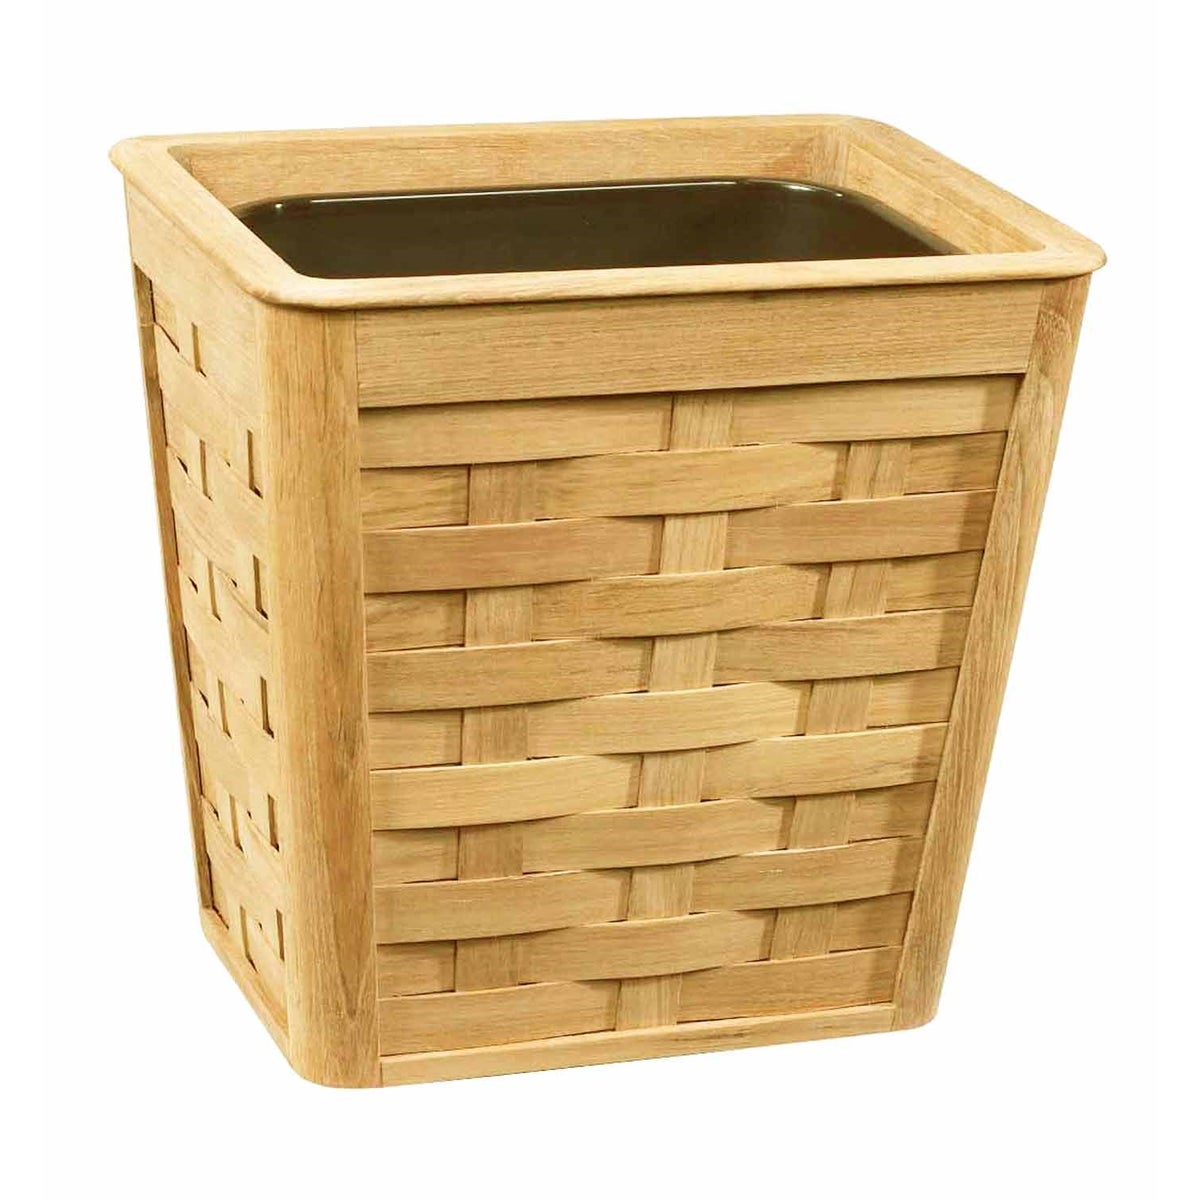 Woven Wastebasket in Natural